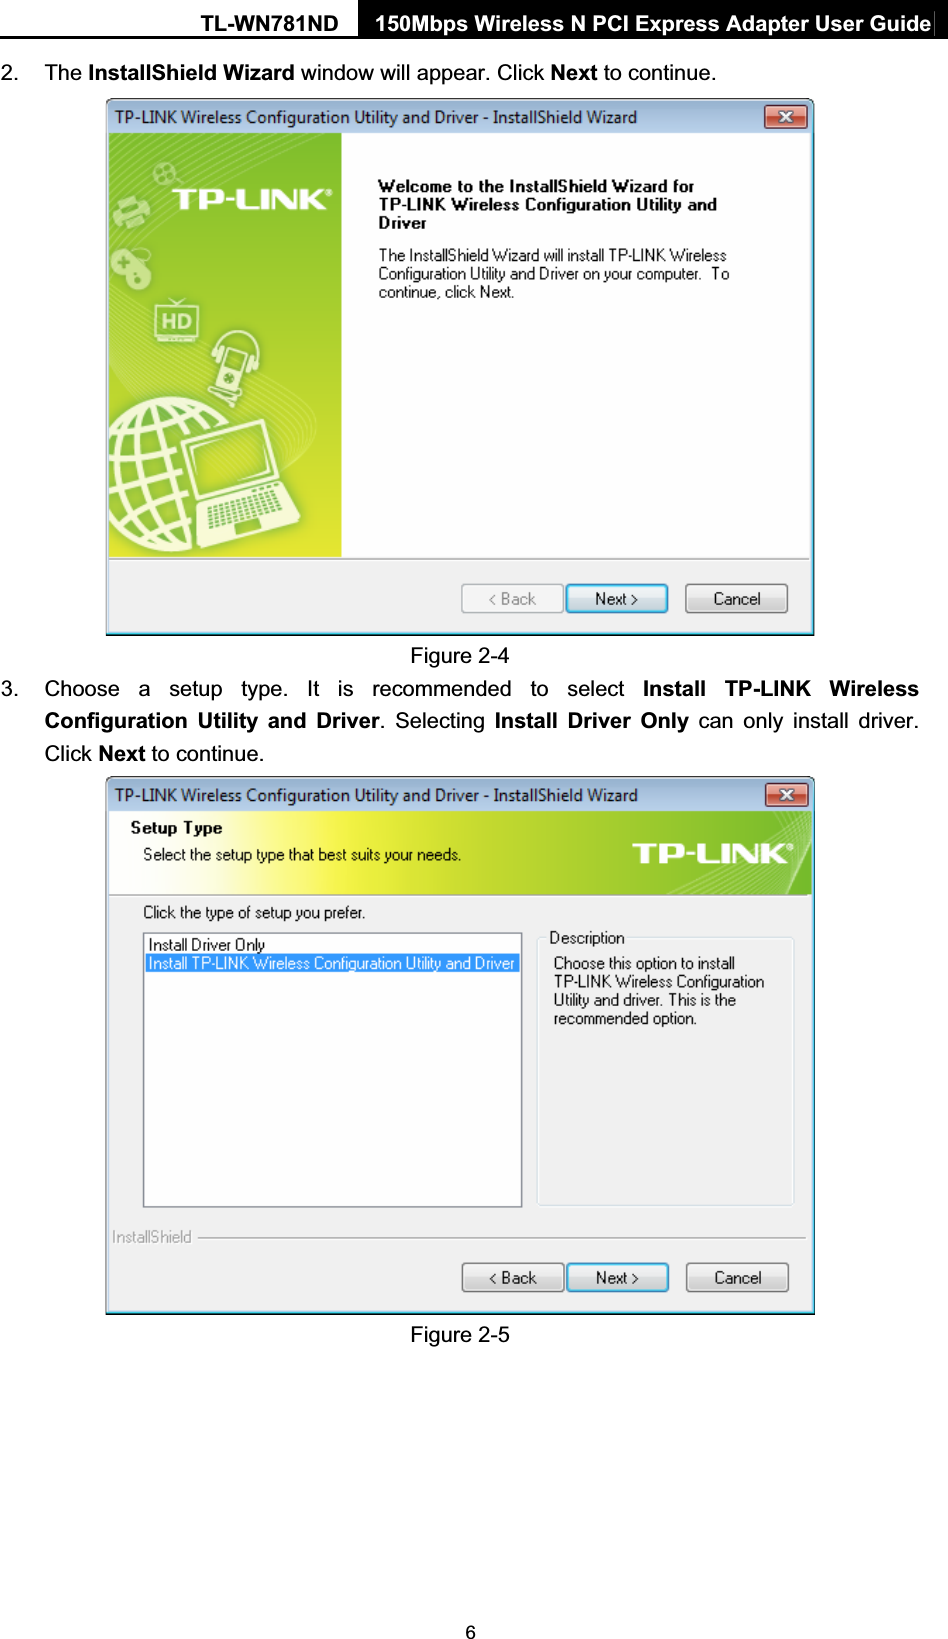 TL-WN781ND  150Mbps Wireless N PCI Express Adapter User Guide  62. The InstallShield Wizard window will appear. Click Next to continue.  Figure 2-4 3.  Choose a setup type. It is recommended to select Install TP-LINK Wireless Configuration Utility and Driver. Selecting Install Driver Only can only install driver. Click Next to continue.  Figure 2-5 